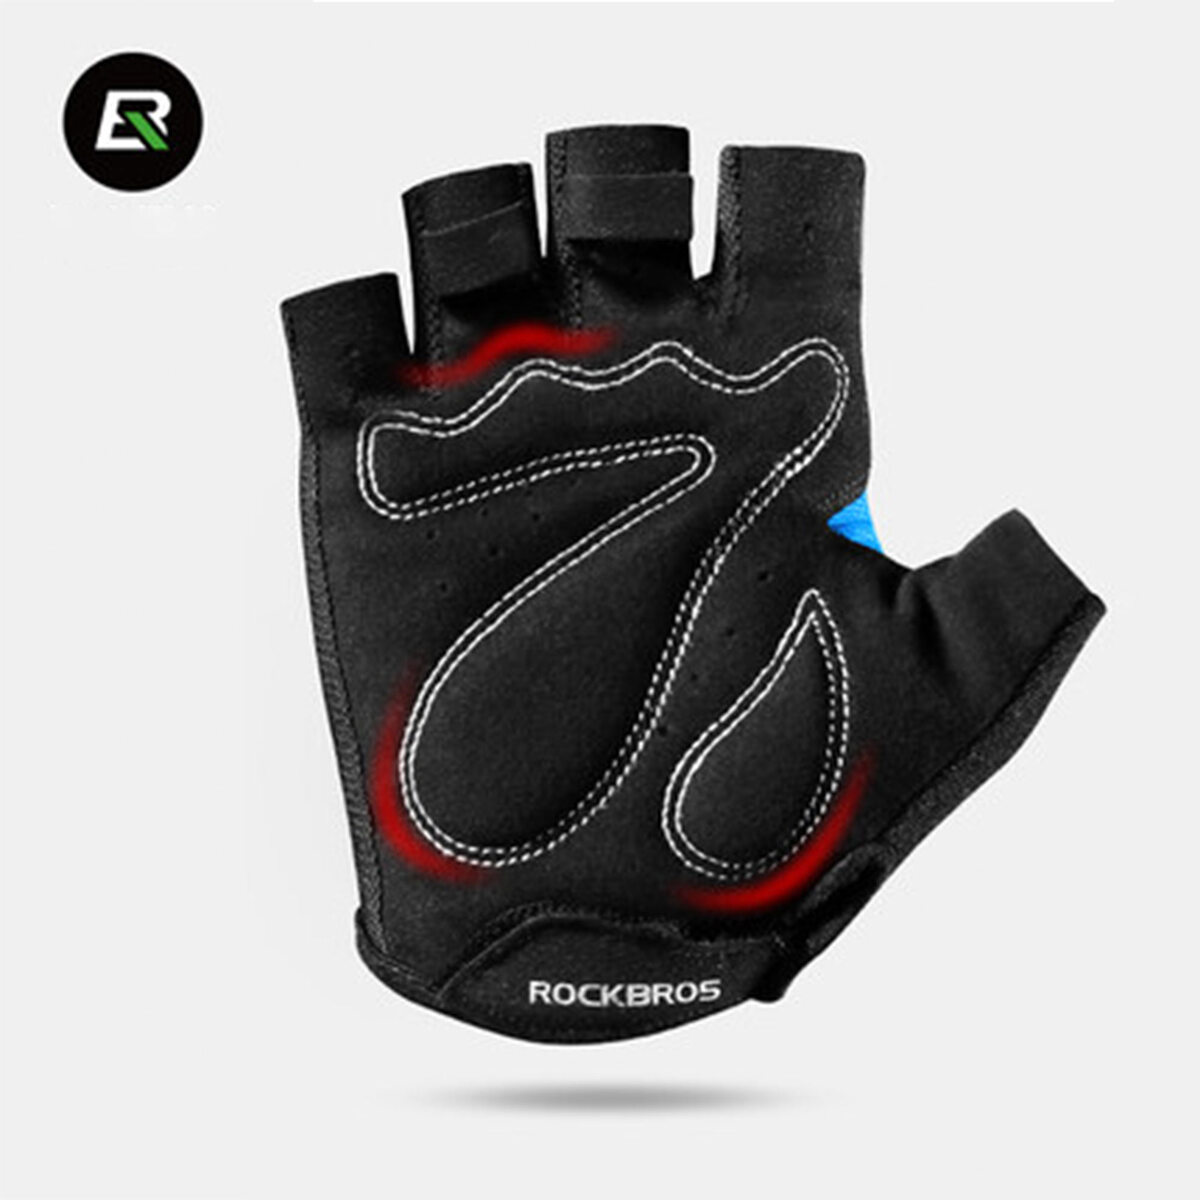 ROCKBROS Half Finger Cycling Gloves Green S099GR Extra Large